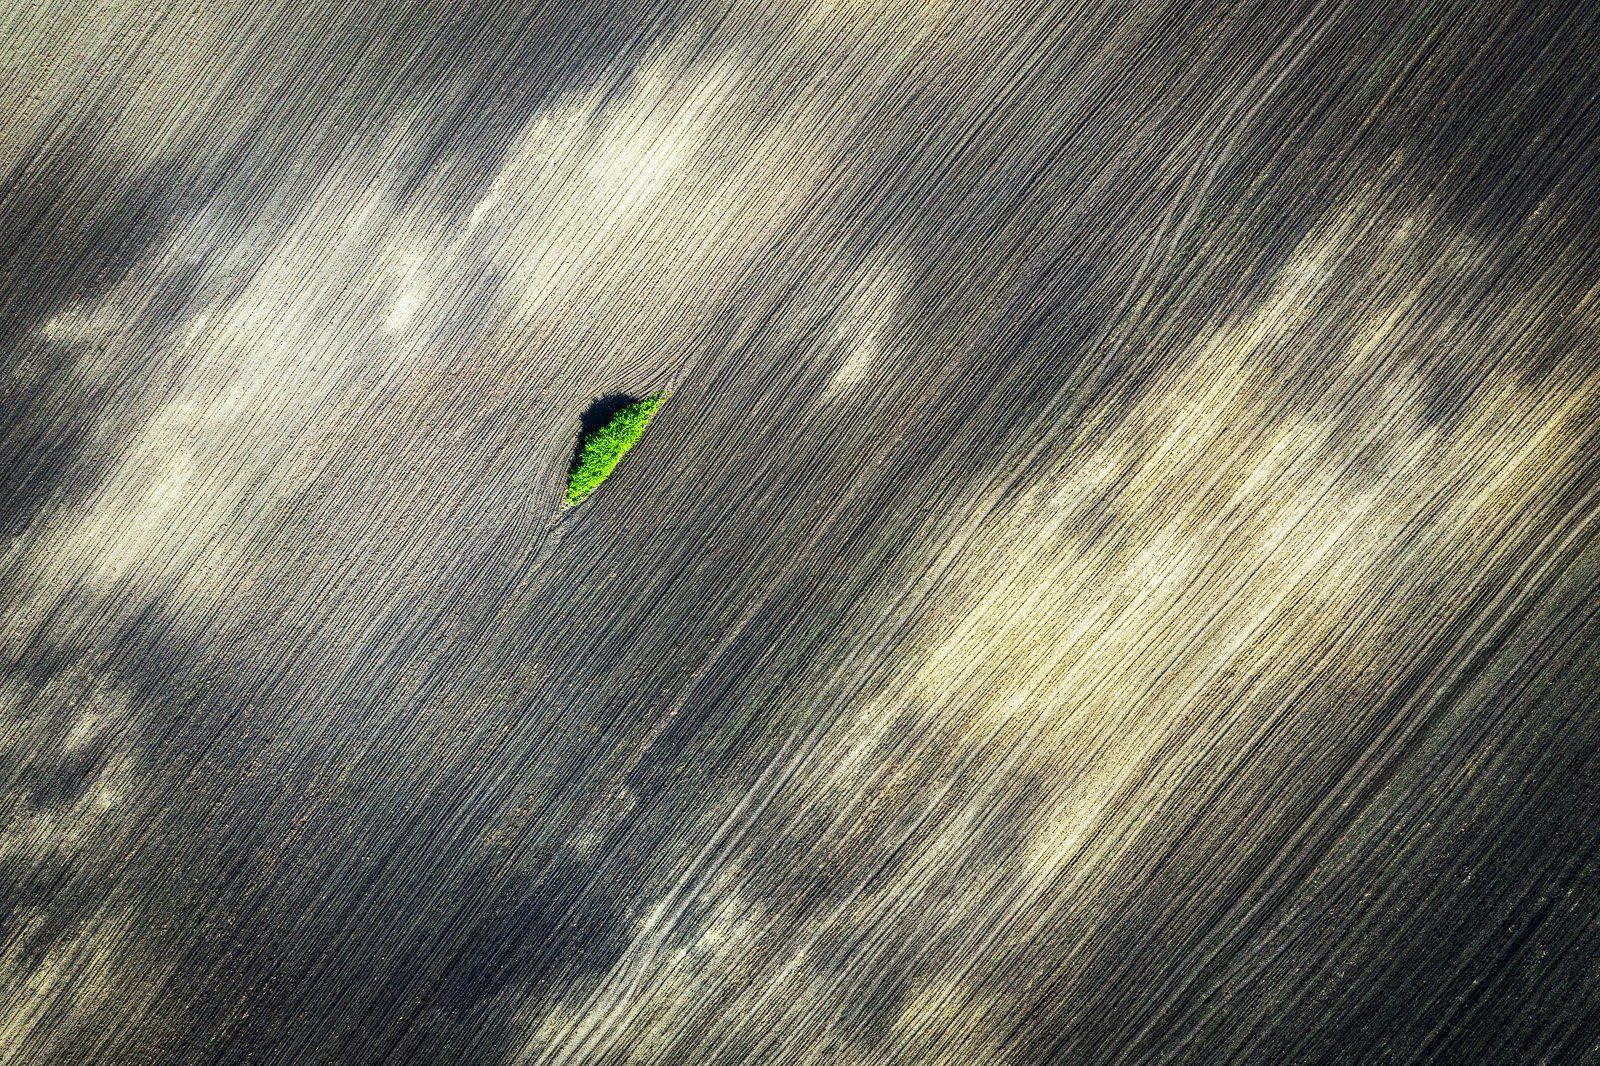 #air, #airphotography, #abstract, #nature, #romania, #, minimal, #green, #beauty, in, nature, #drone, Gheorghe Popa